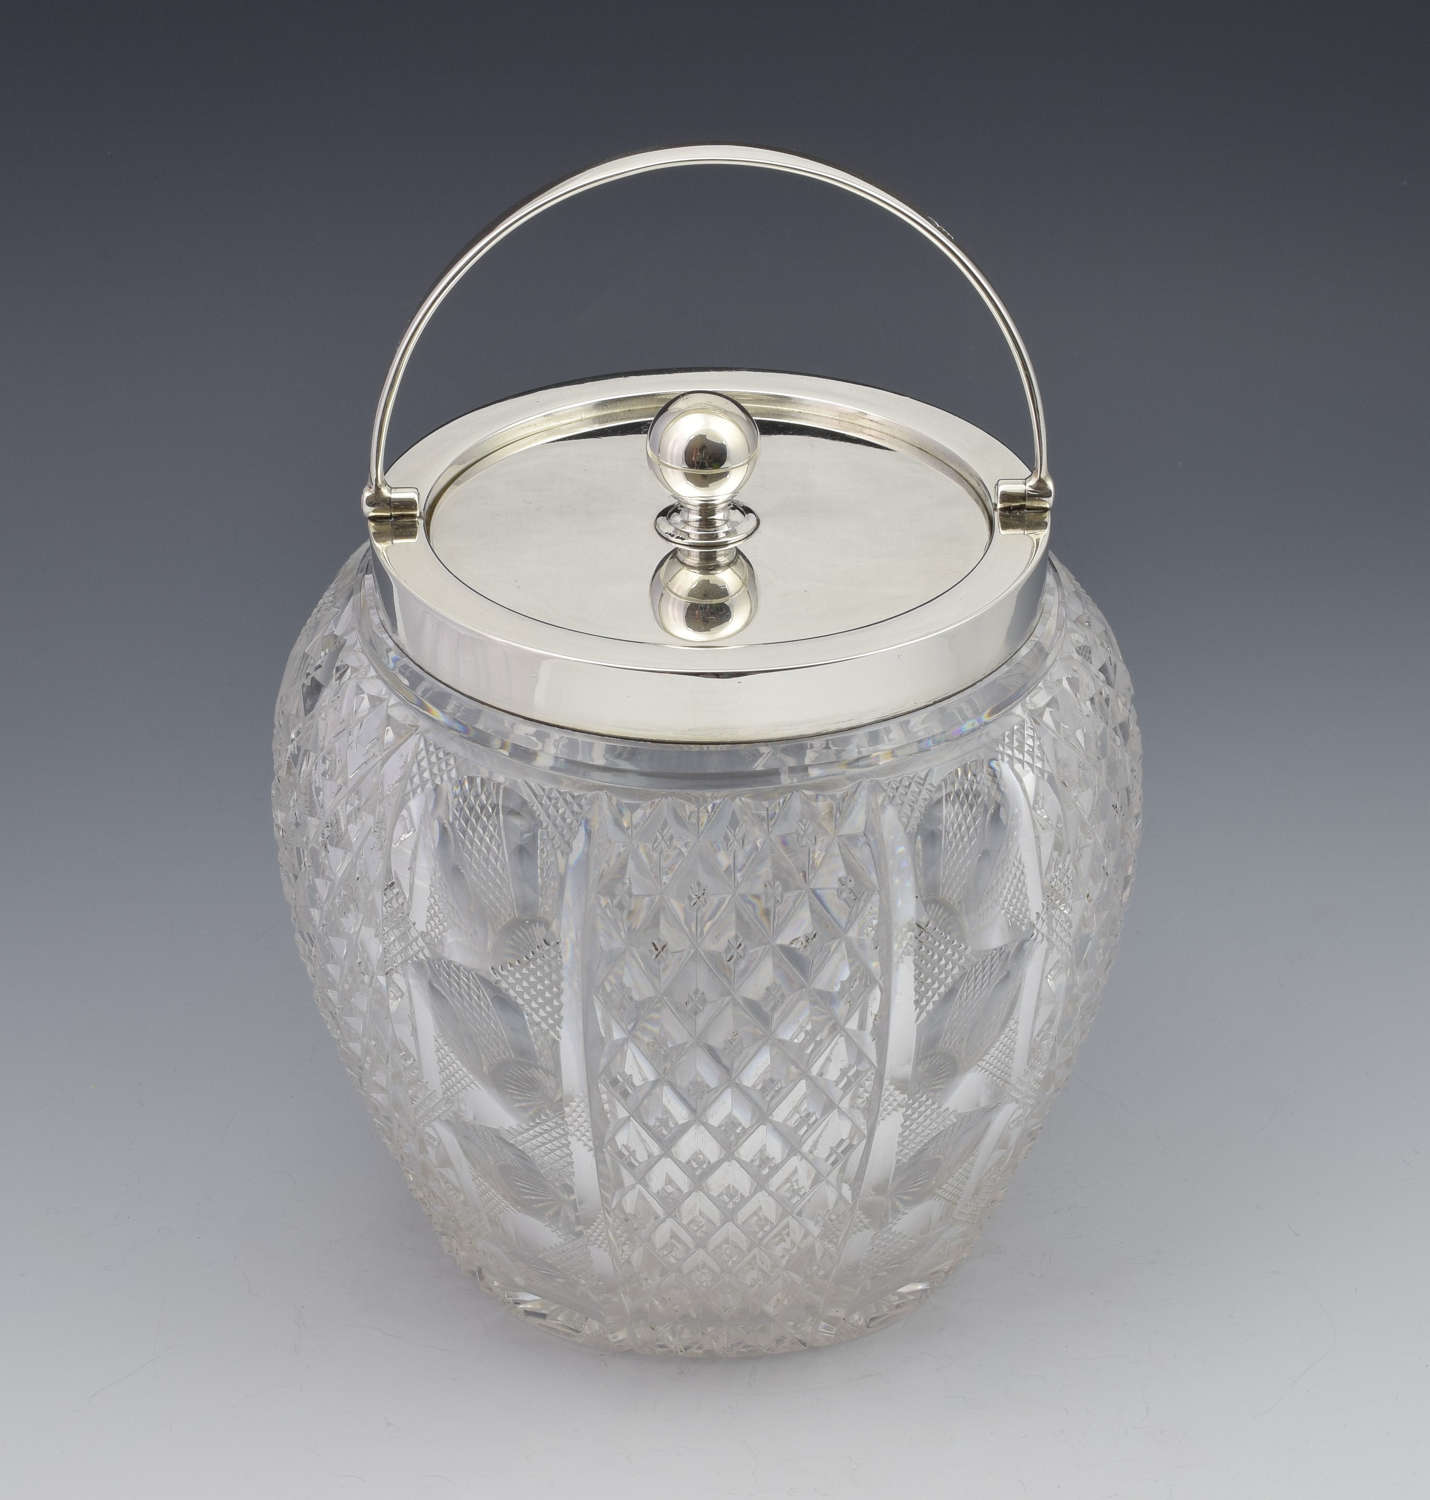 Edwardian Silver & Cut Glass Biscuit Box / Barrel Grinsell & Sons